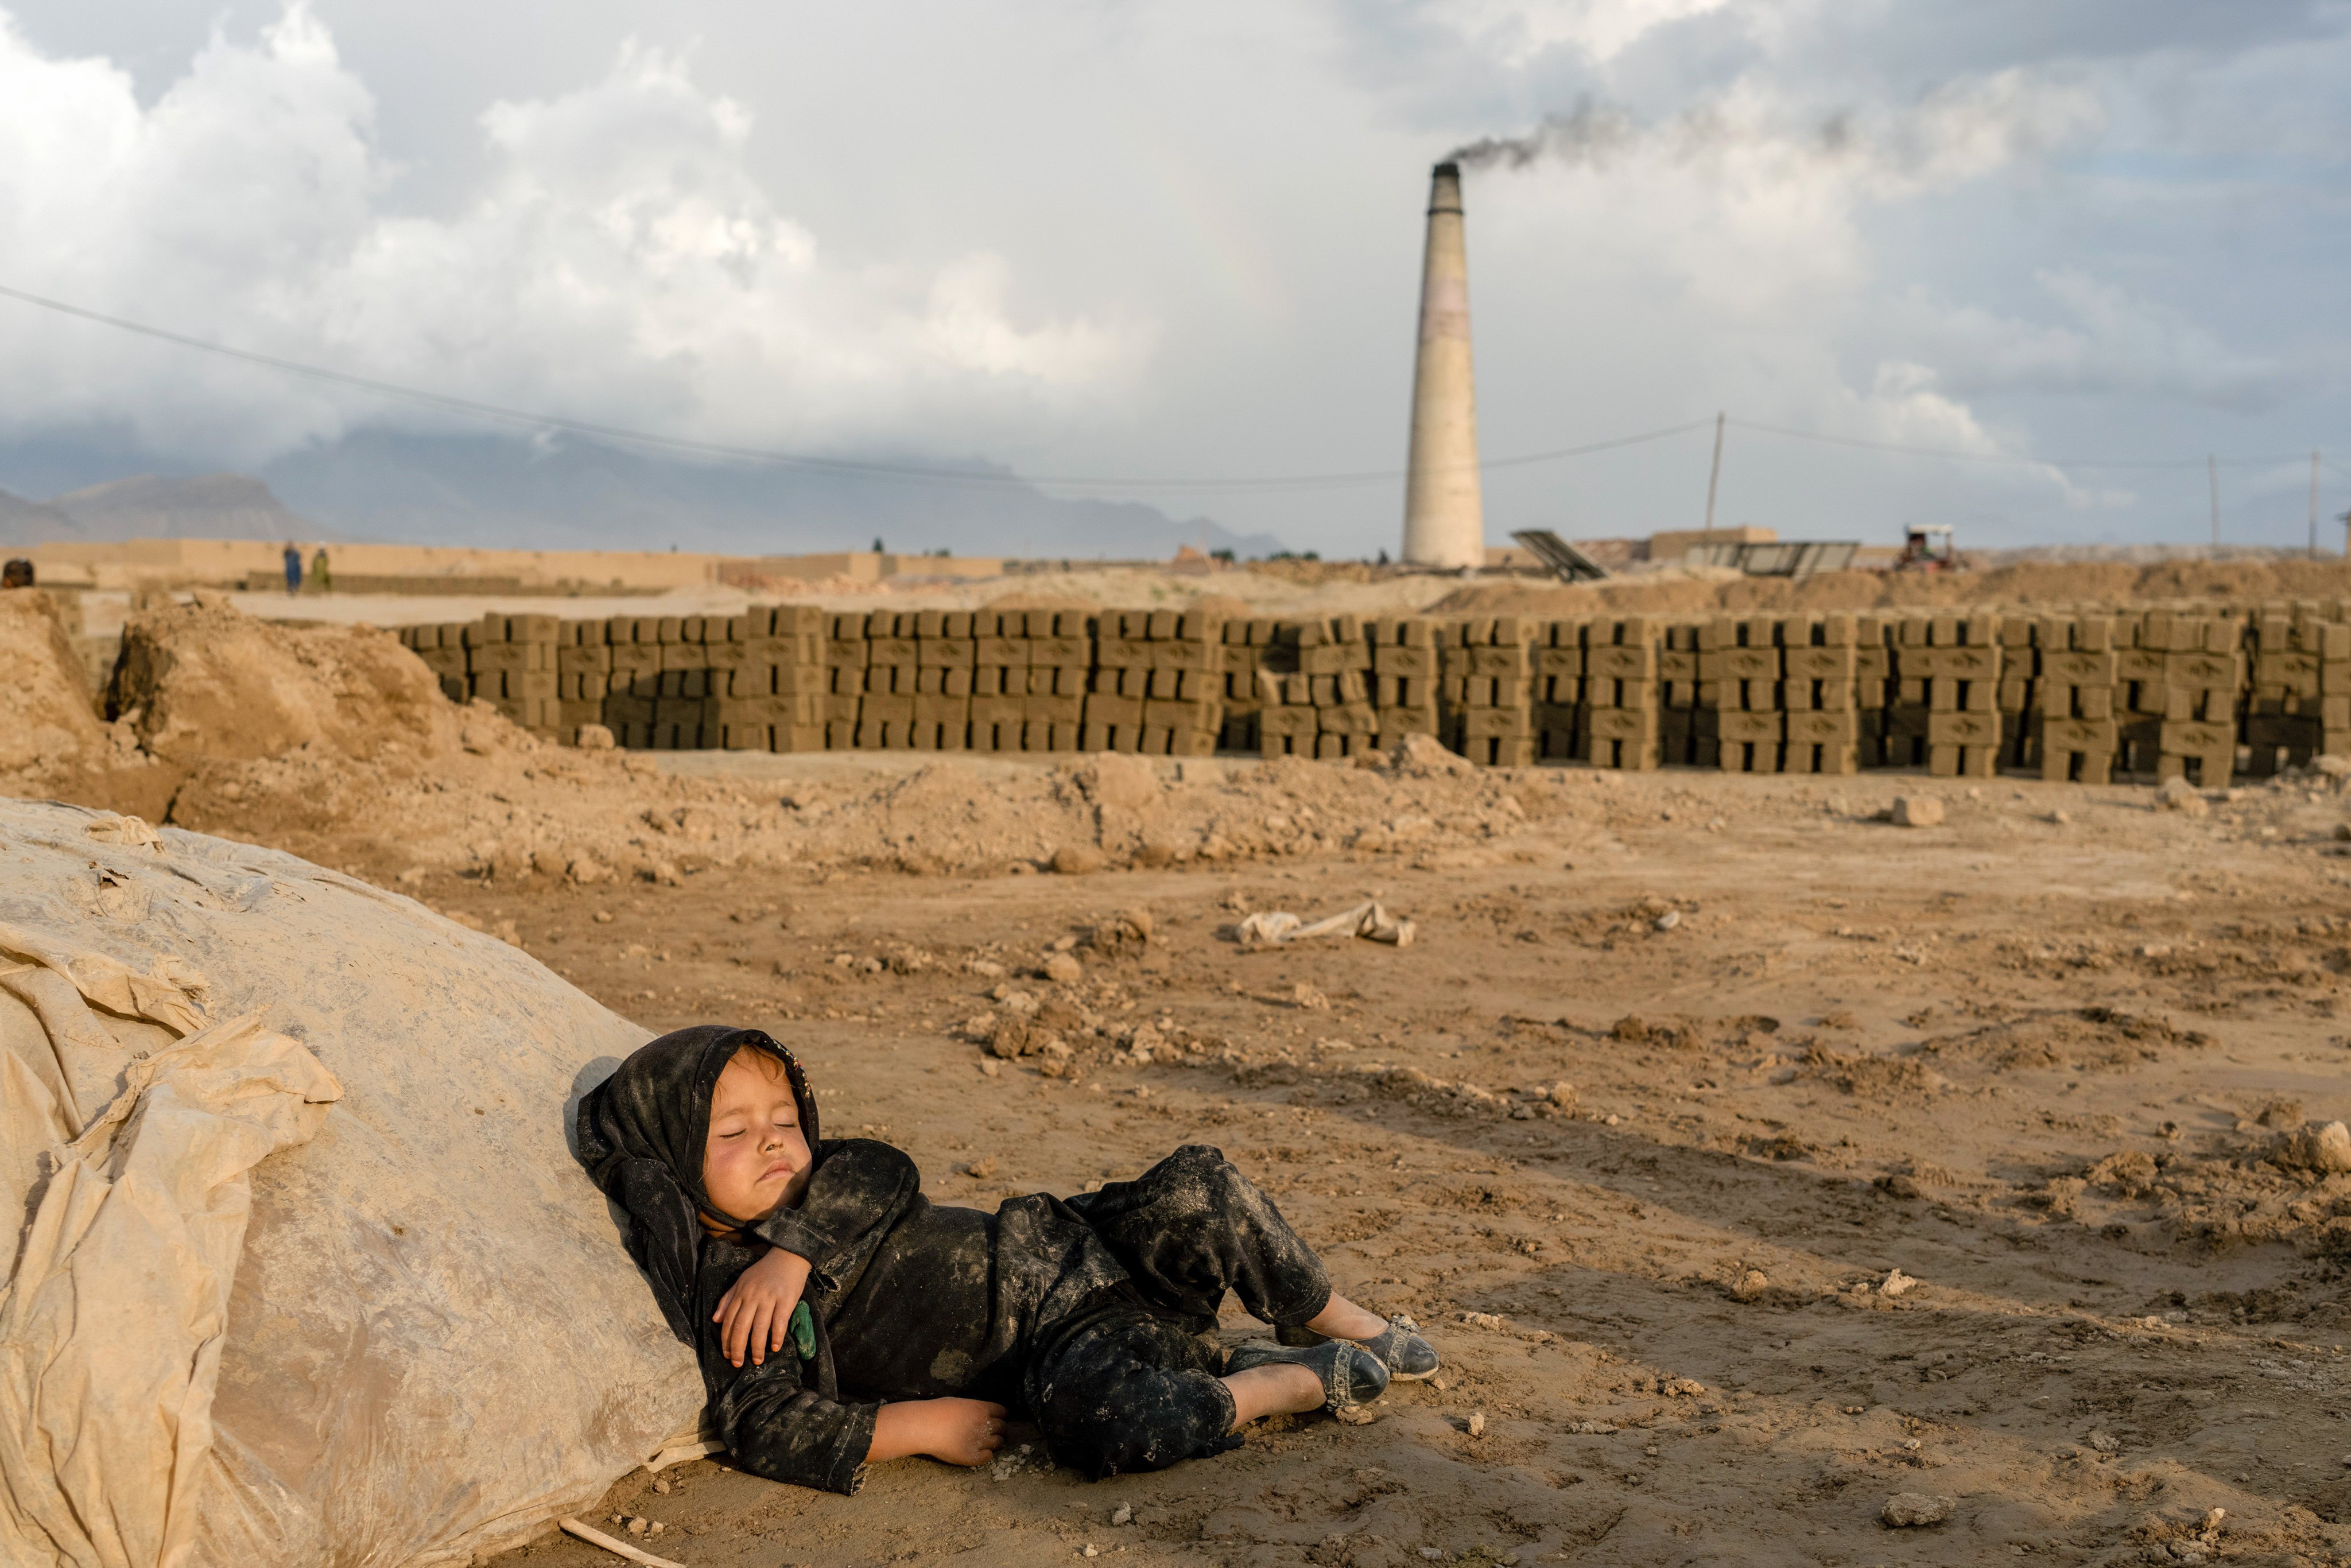 A four-year-old Afghan girl sleeps after work in a brick factory on the outskirts of Kabul on August 17. Aid agencies say more children are working since the economy collapsed after the Taliban takeover. Photo: AP